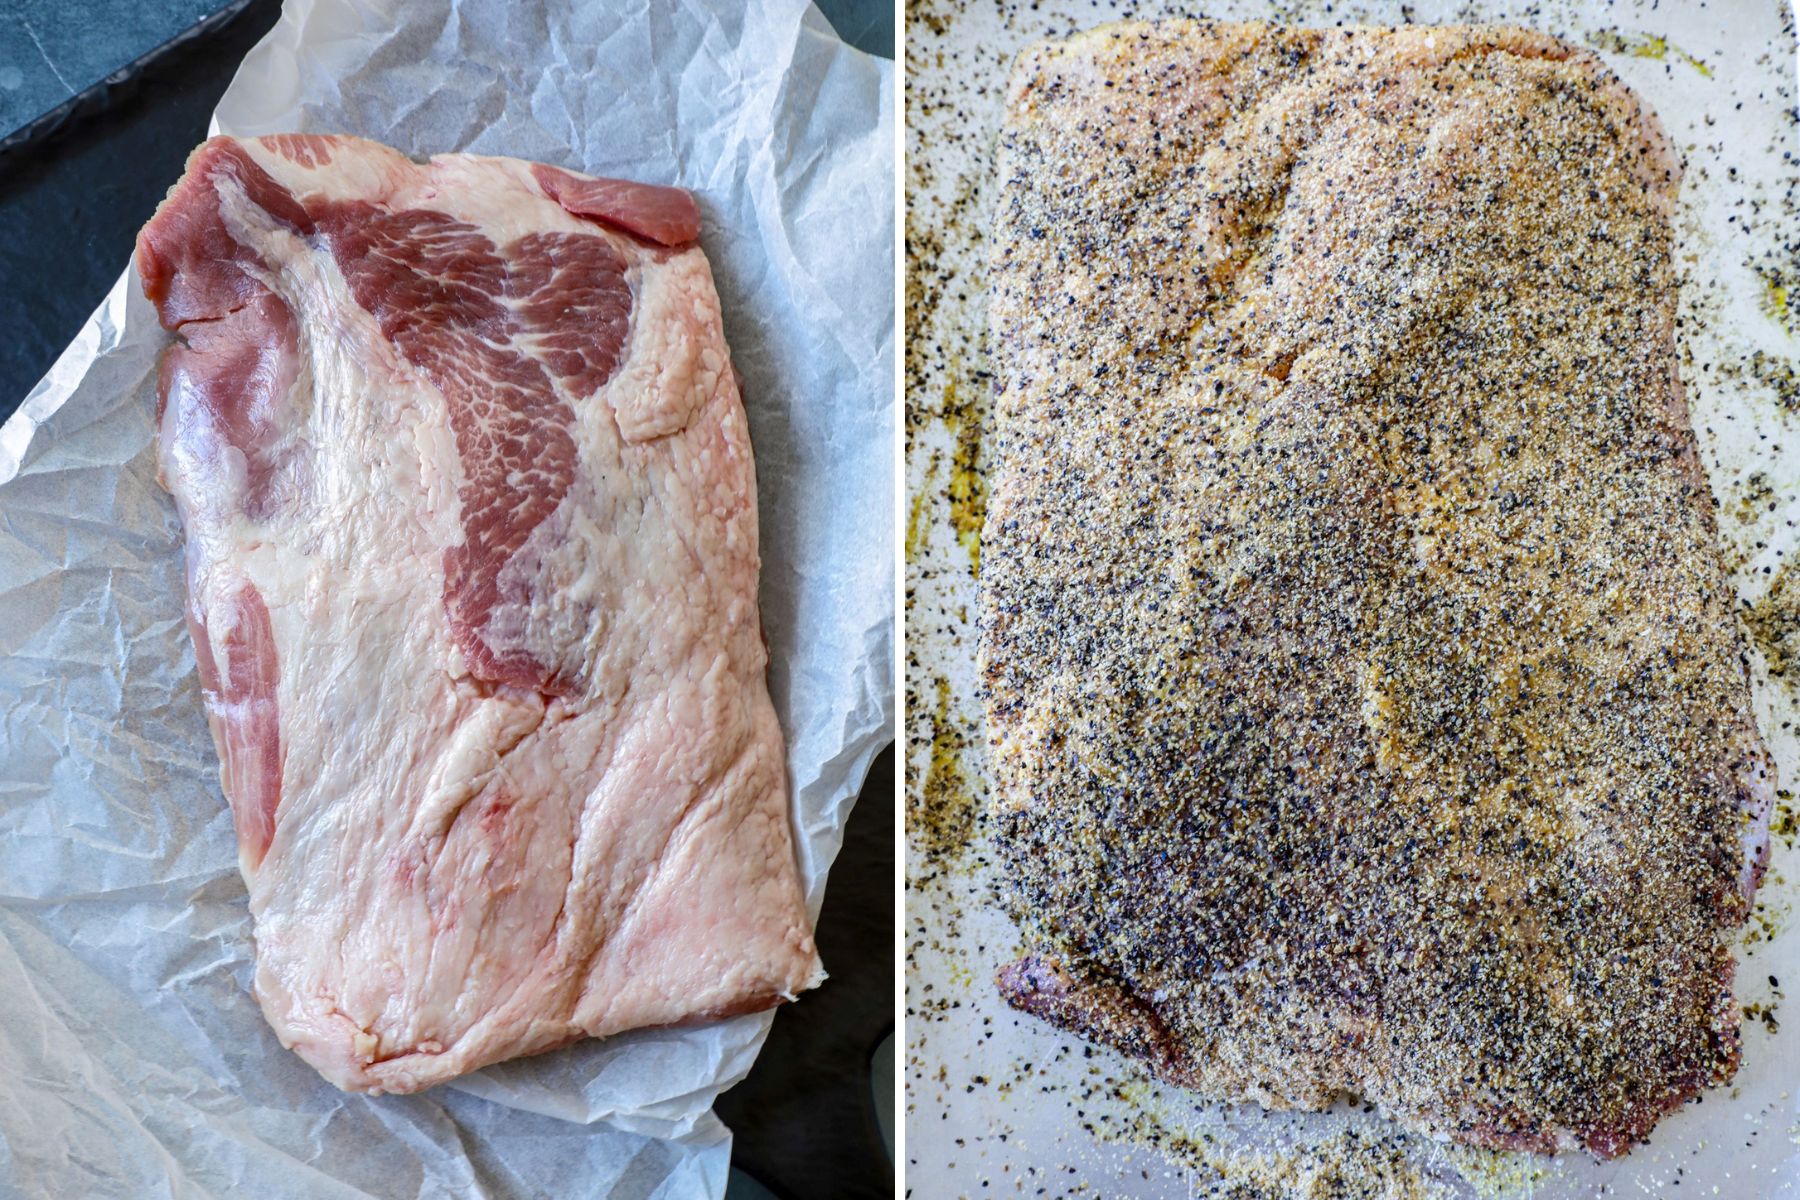 Kicking off summer with my Brisket Style Pork Belly. @reynoldsbrands Butcher  Paper helps you get that crispy bark and juicy meat. Their built-in slide  cutter is super easy to use. Check out @